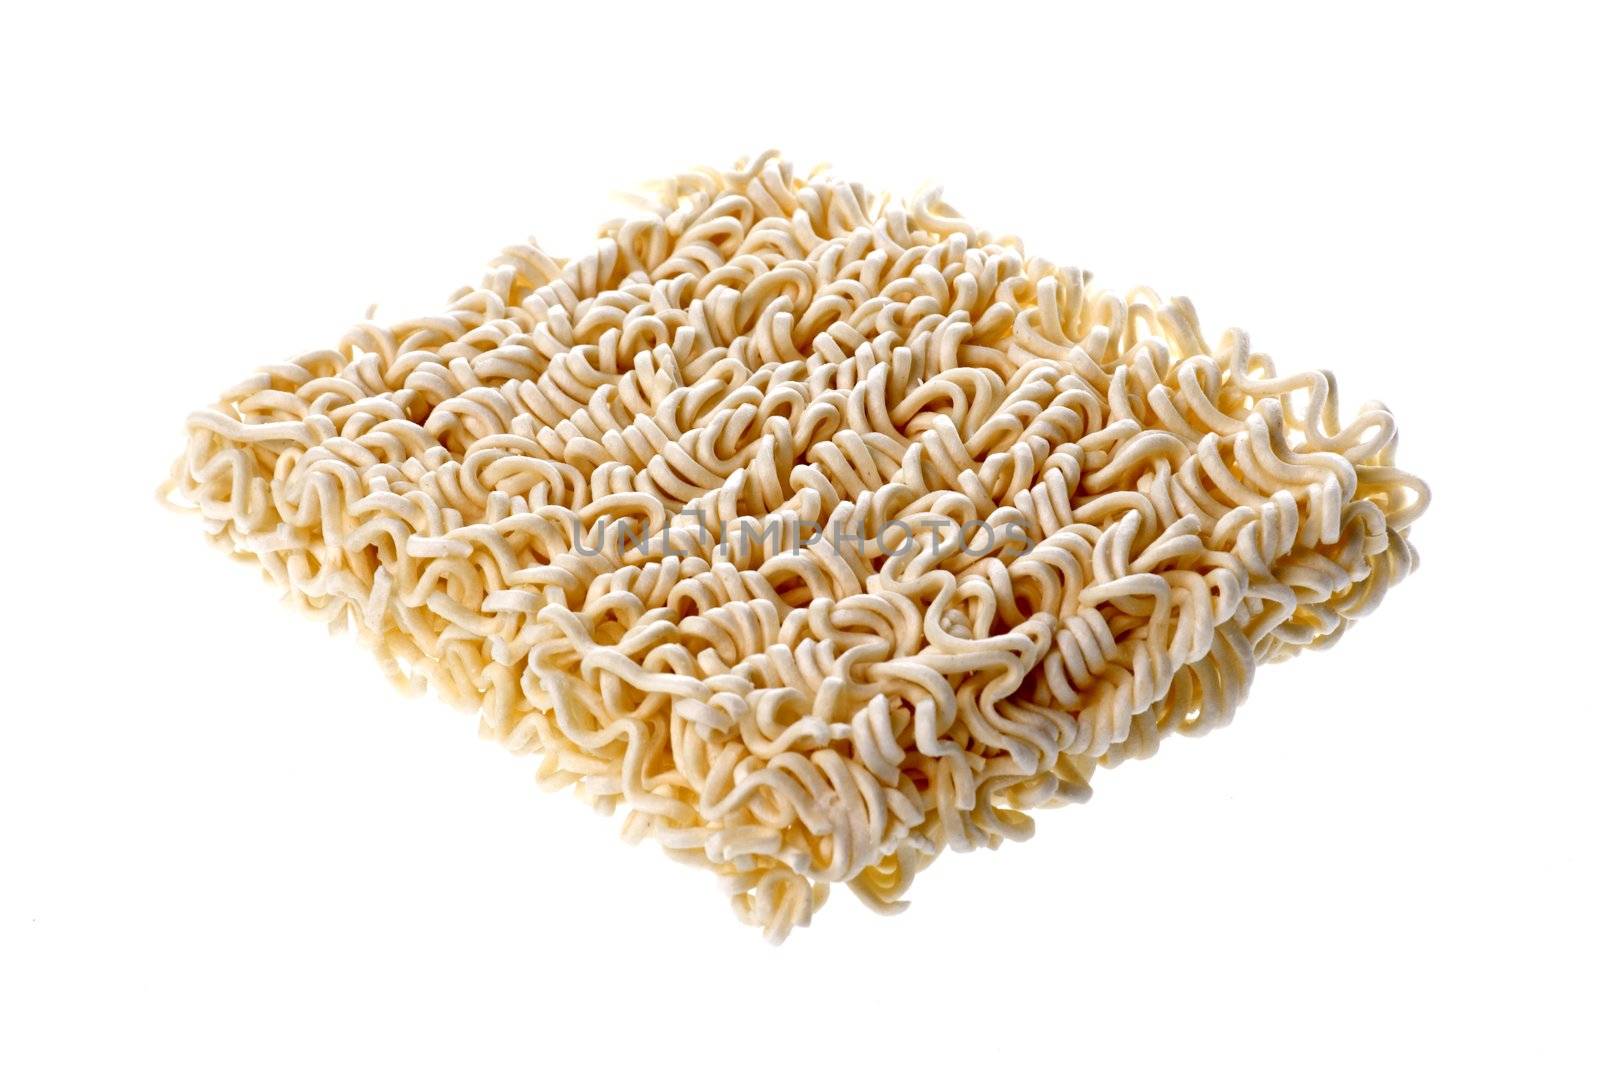 Isolated image of instant noodles ready for cooking.